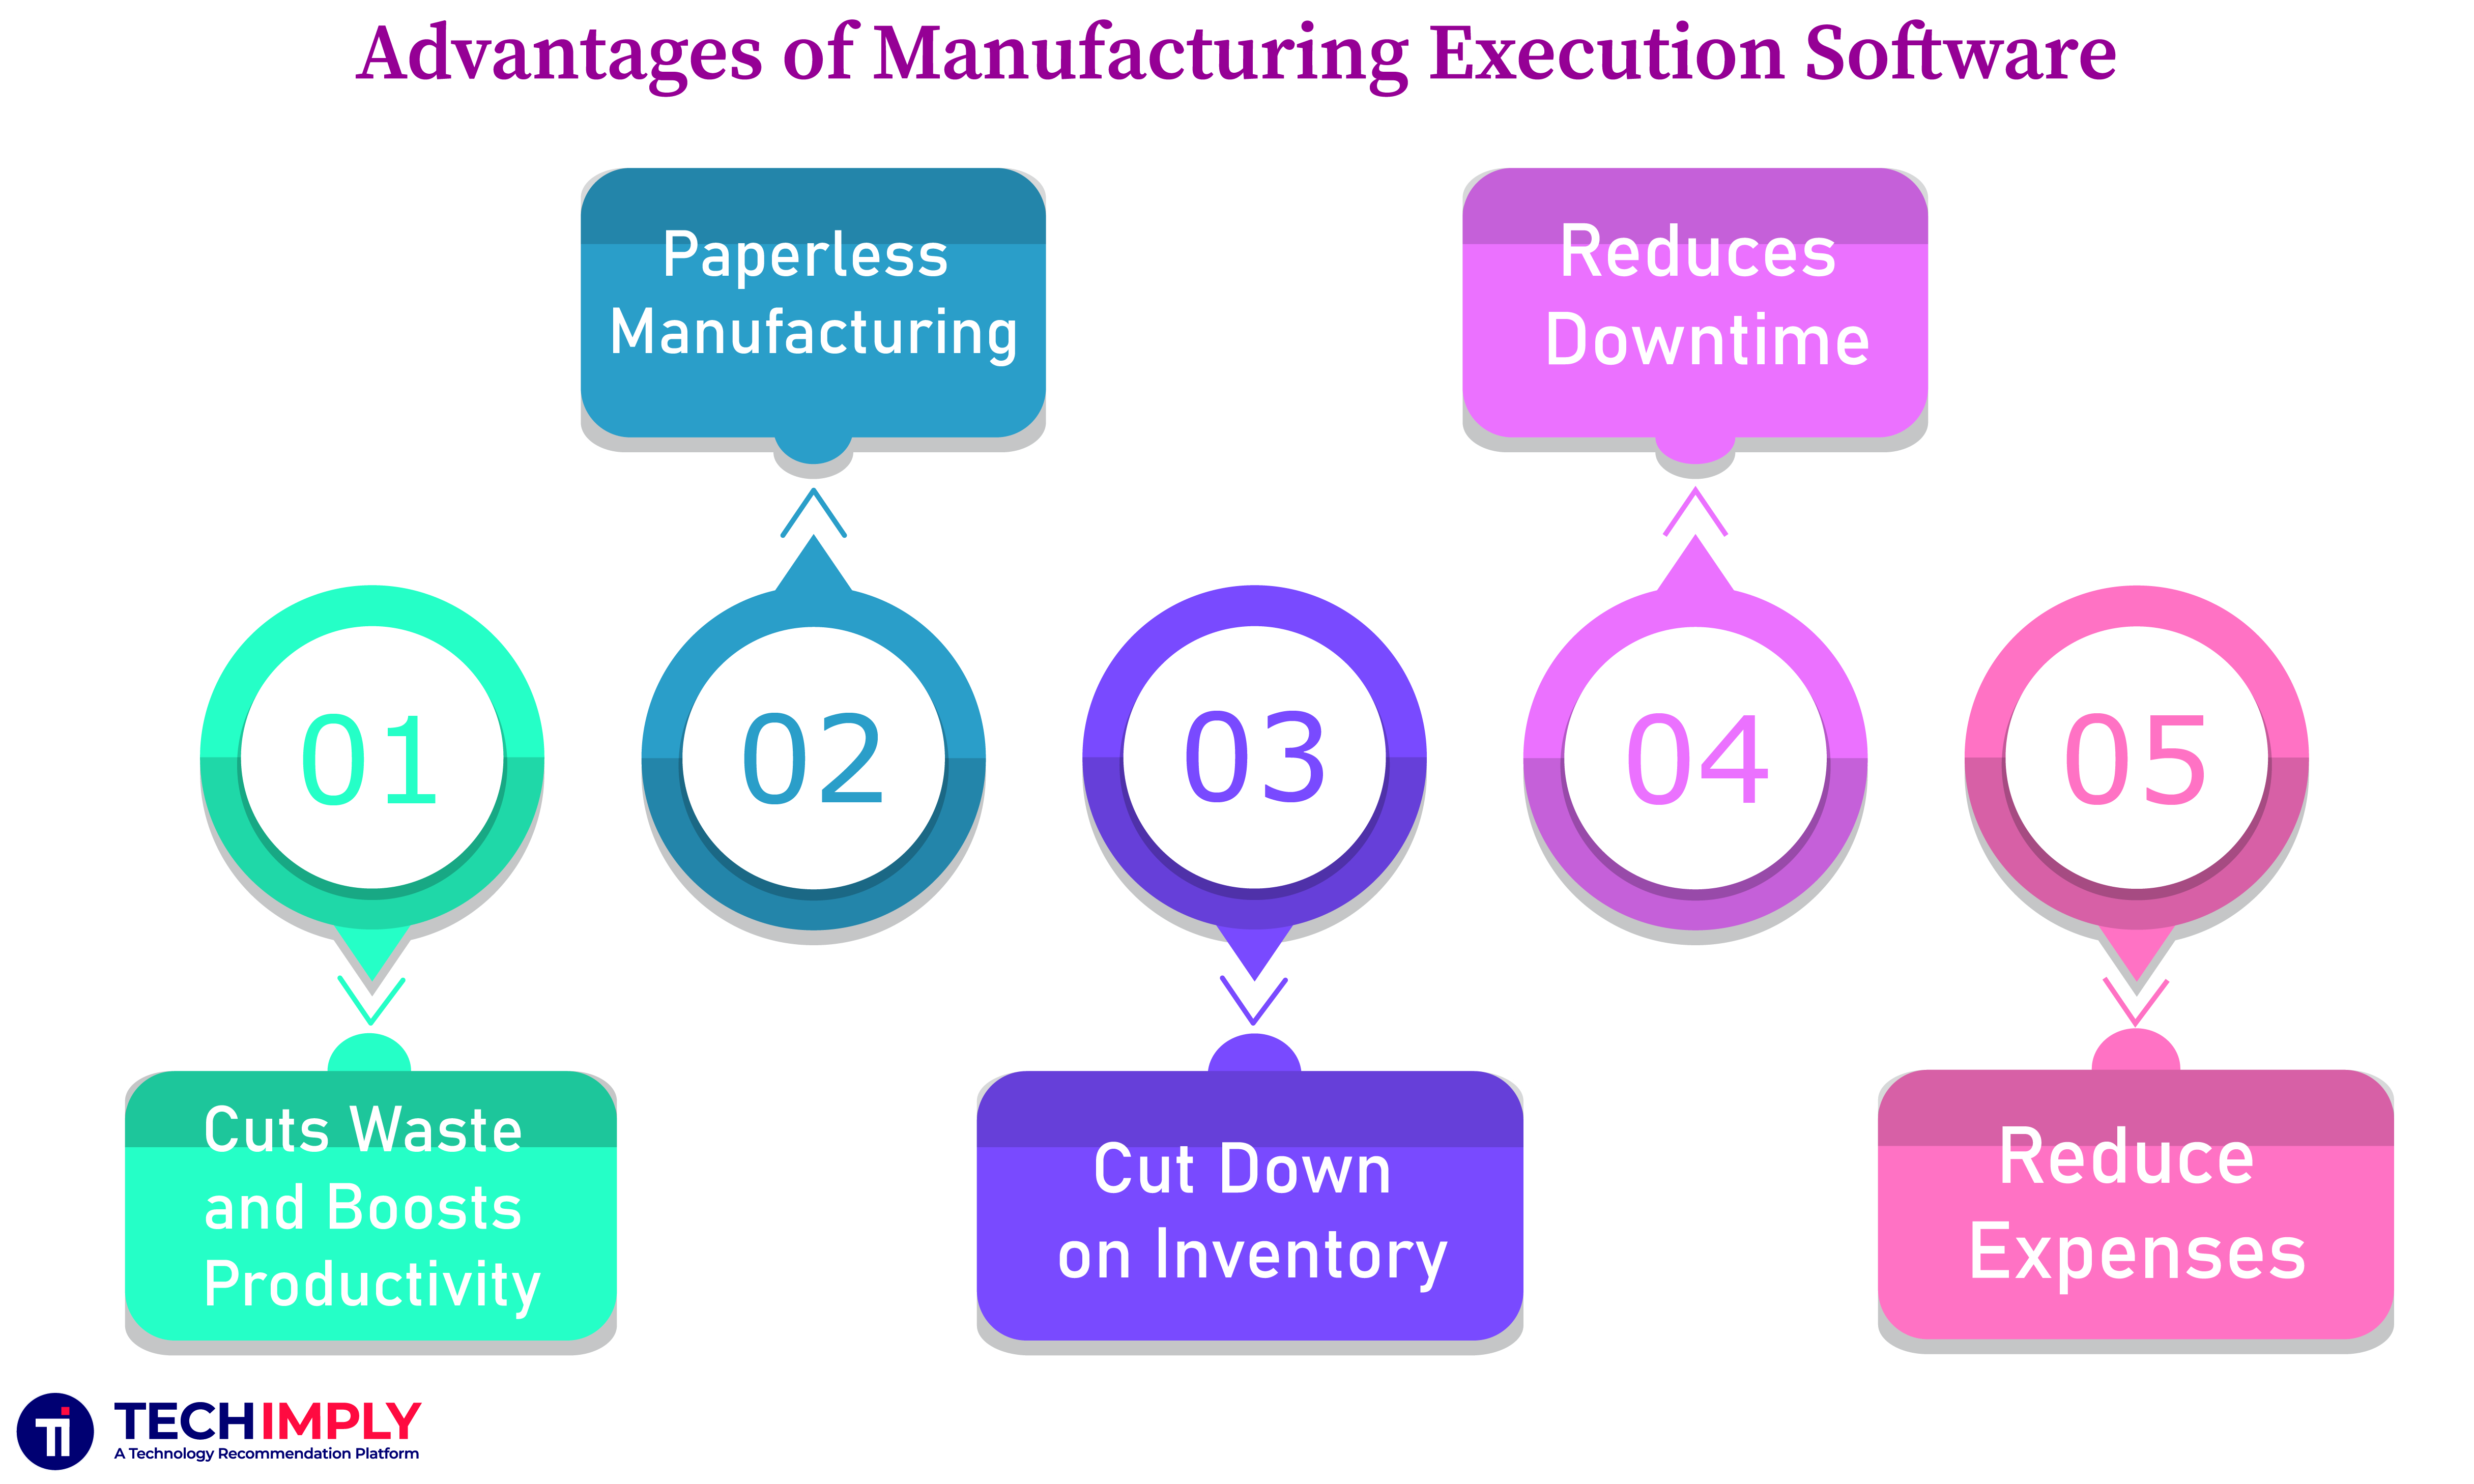 Manufacturing execution software